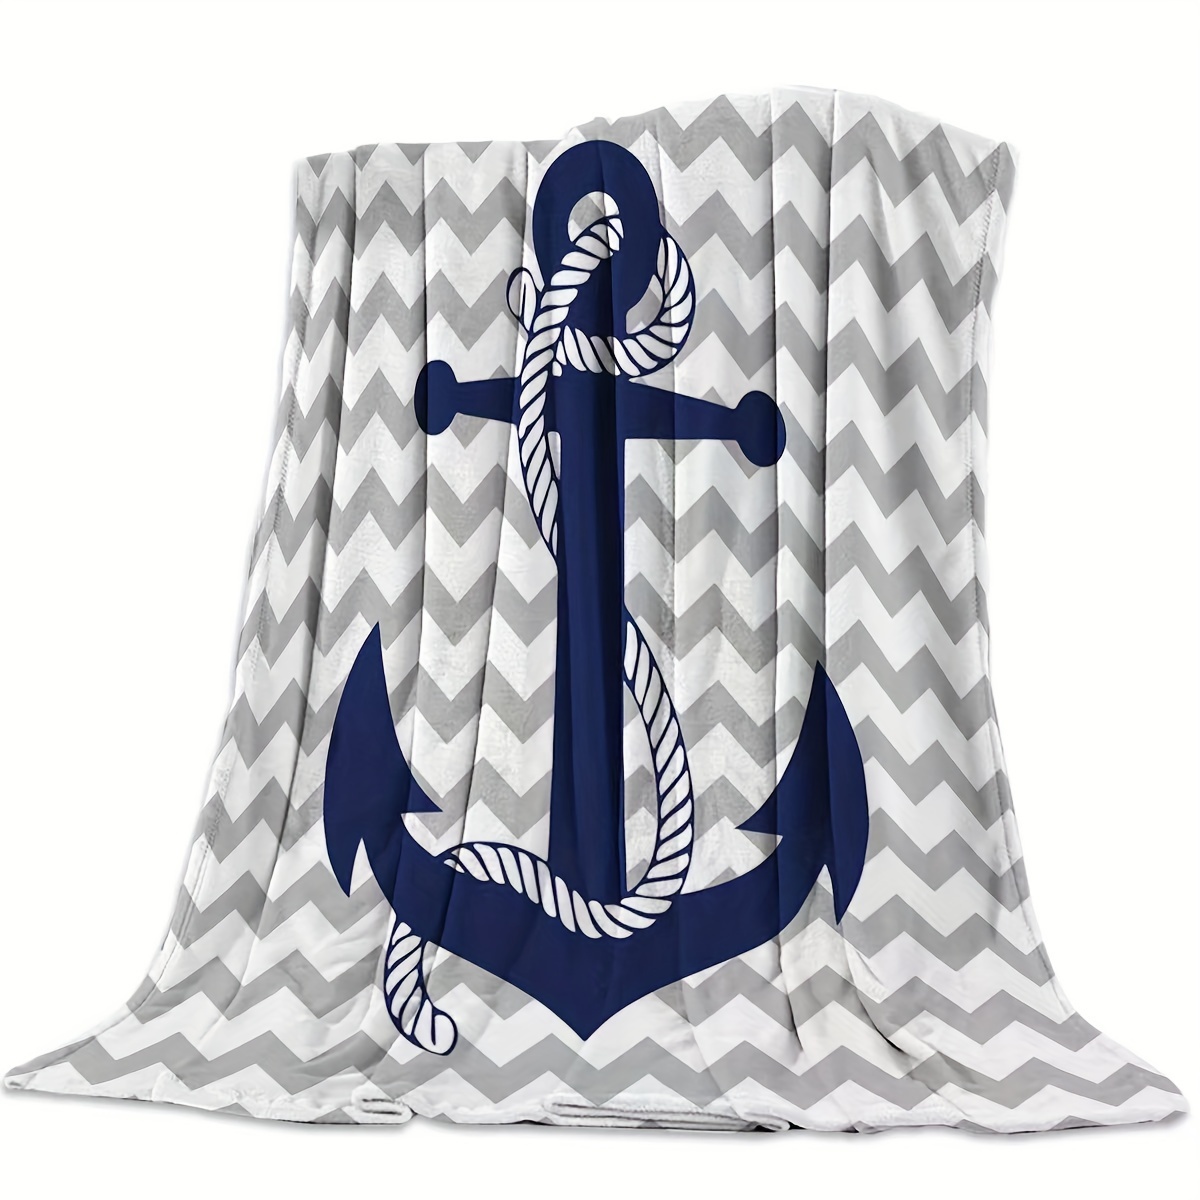 

Ultra-soft Flannel Throw Blanket - Nautical Navy Blue Anchor With Gray & White, Cozy Plush For Sofa/bed, Stain-resistant, All-season Comfort Flannel Blanket Comforter Blanket